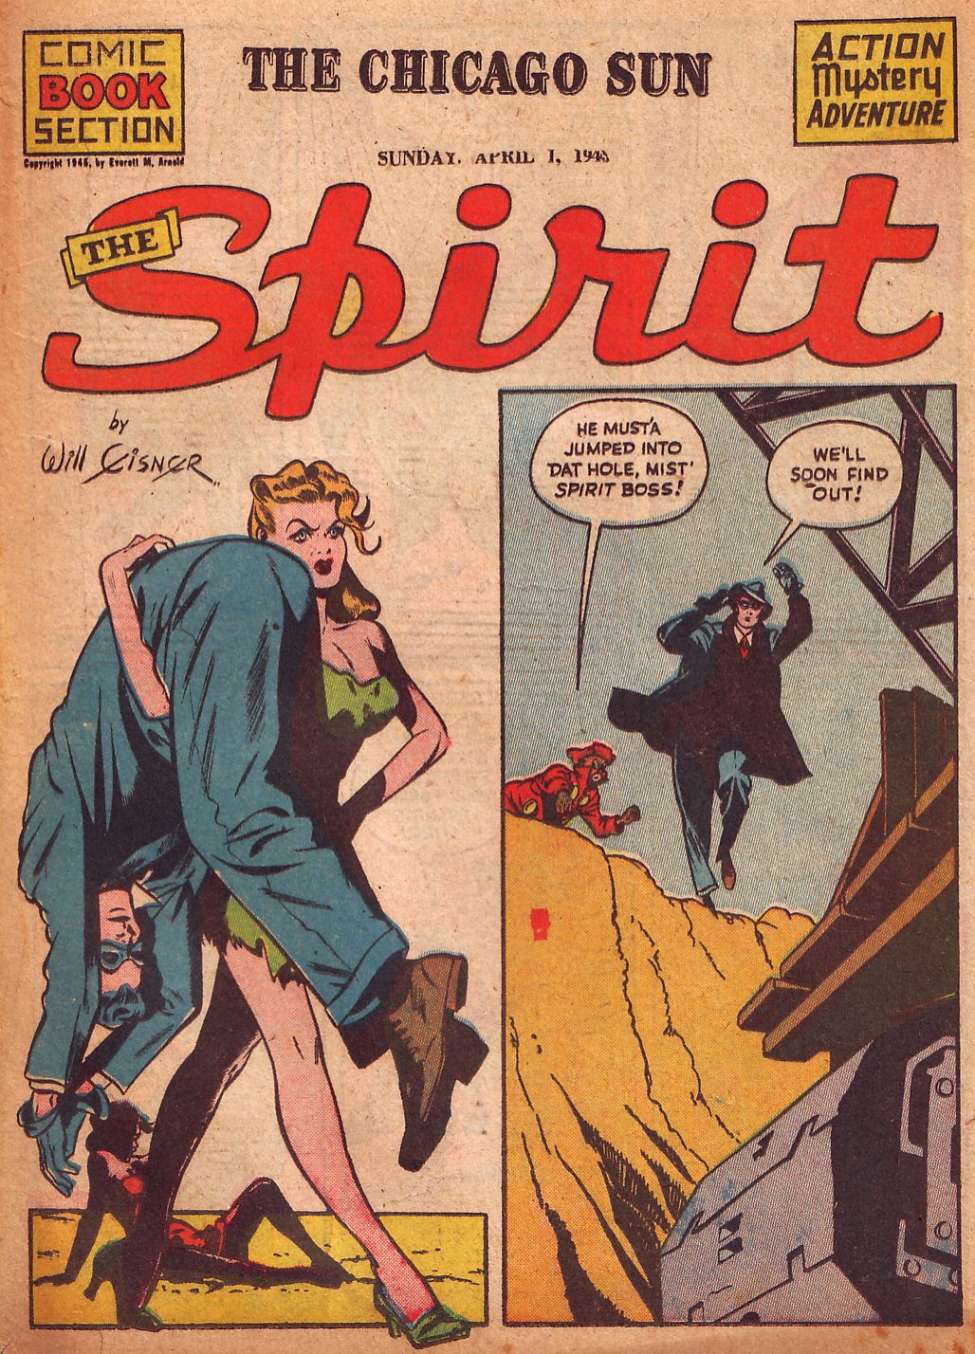 Comic Book Cover For The Spirit (1945-04-01) - Chicago Sun